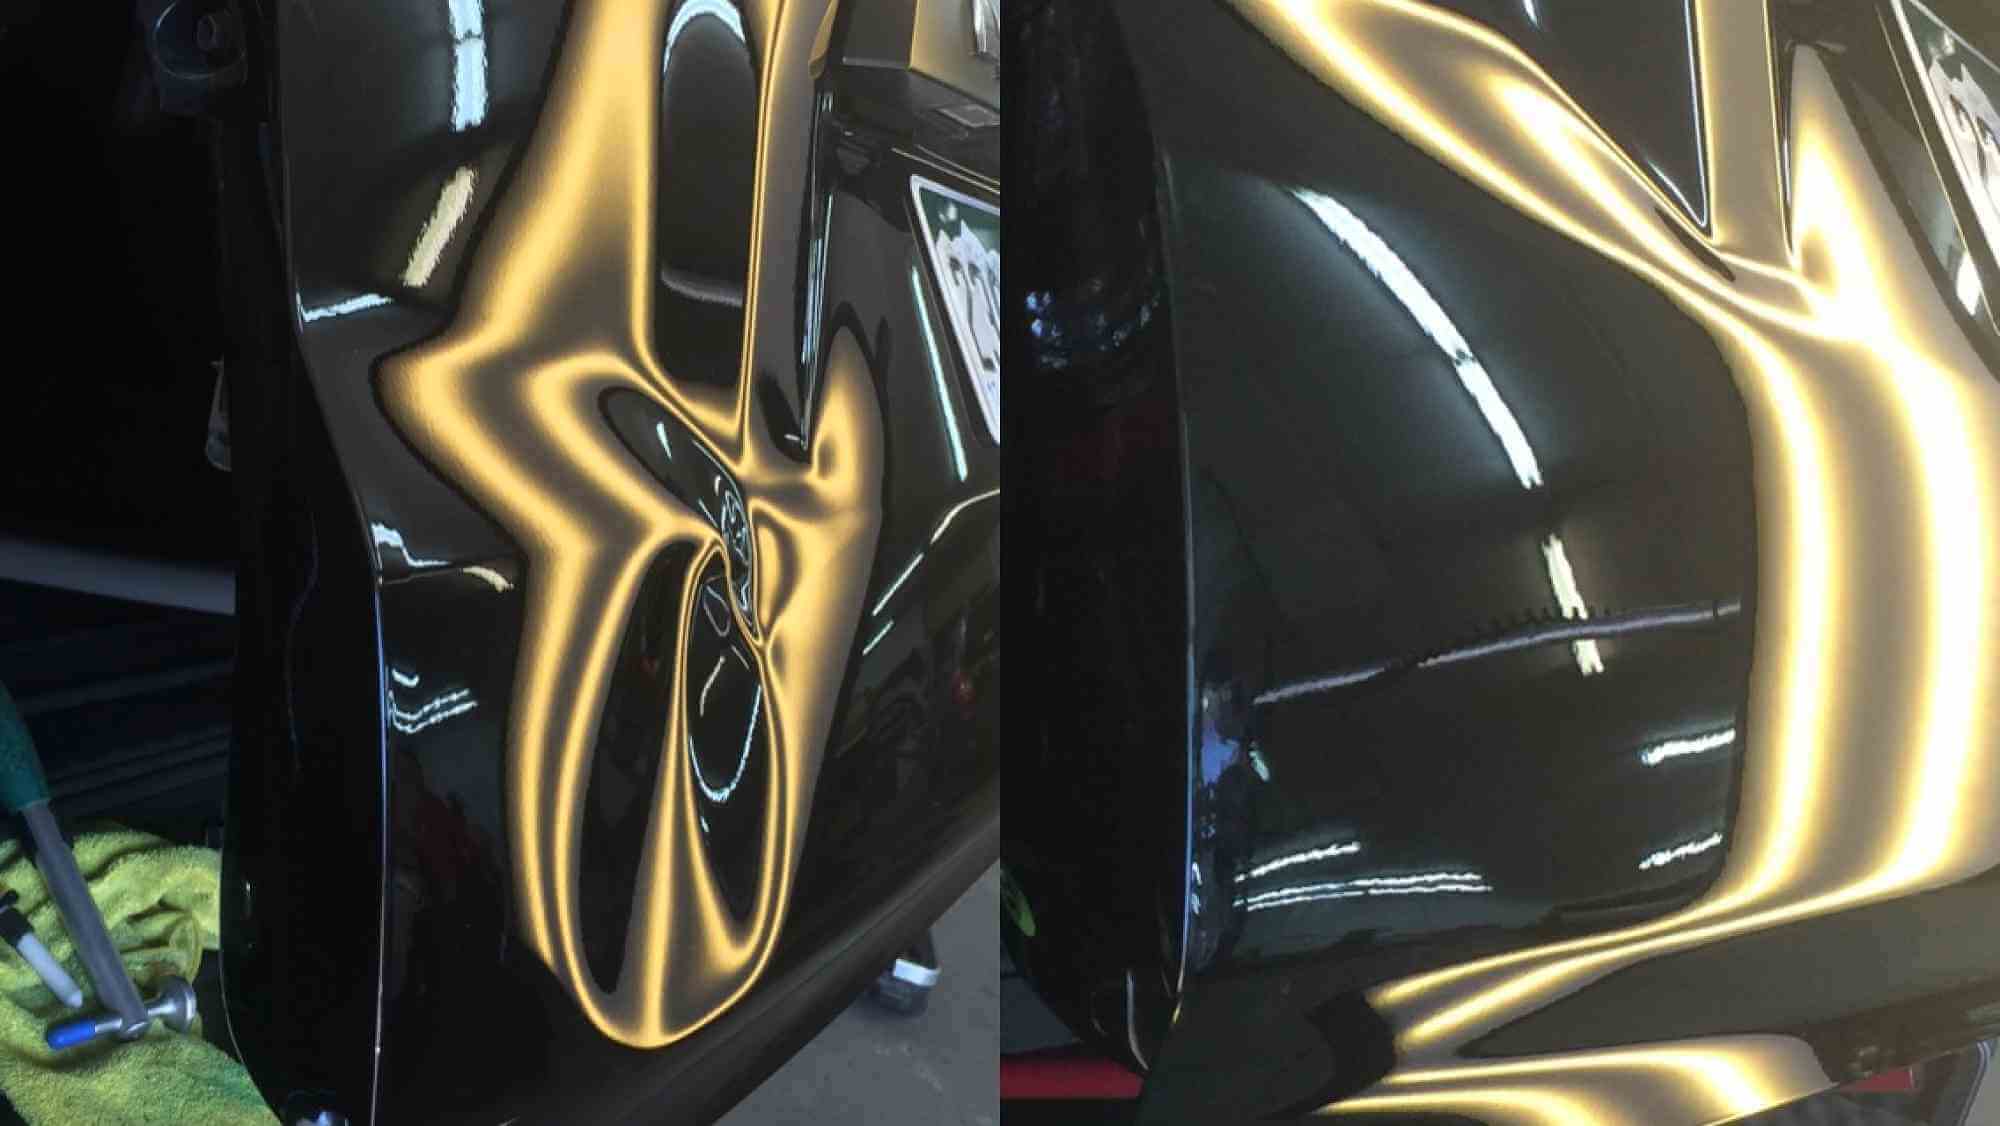 Toyota lift gate before and after